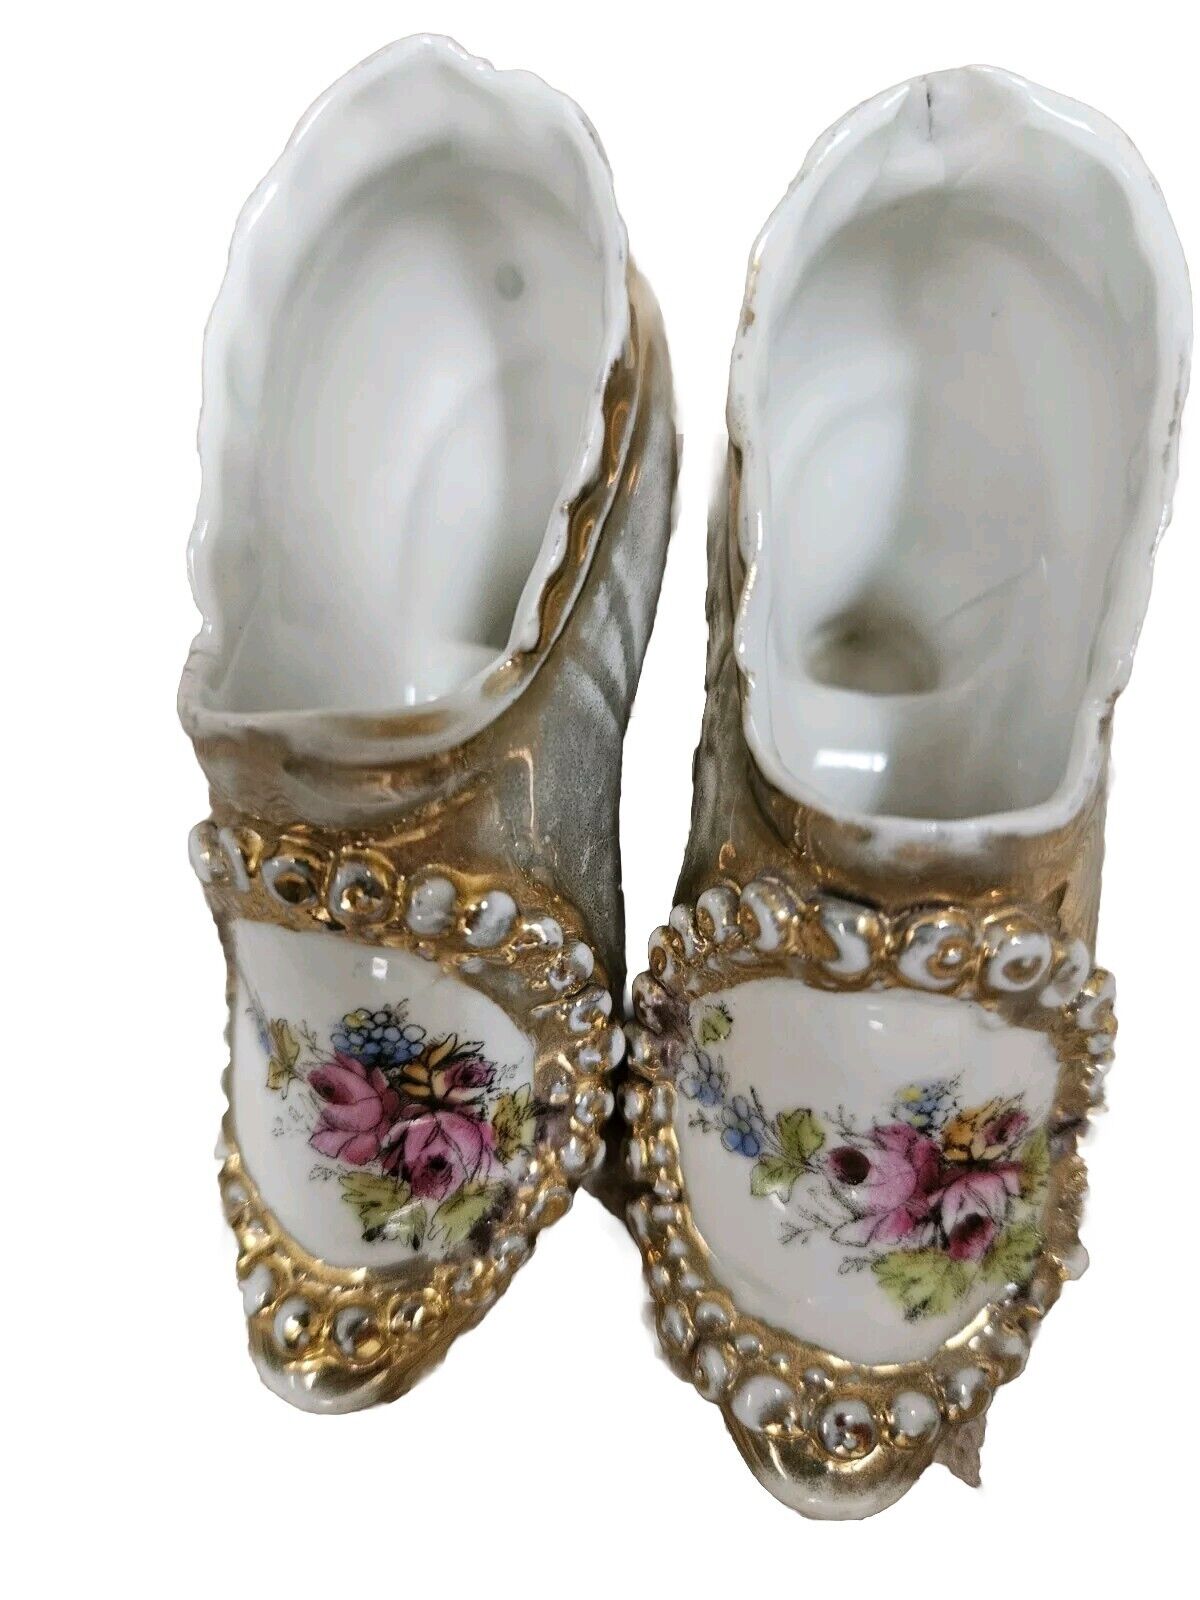 Swan Creations Vintage Victorian Porcelain Fine China Princess Shoe With Flowers